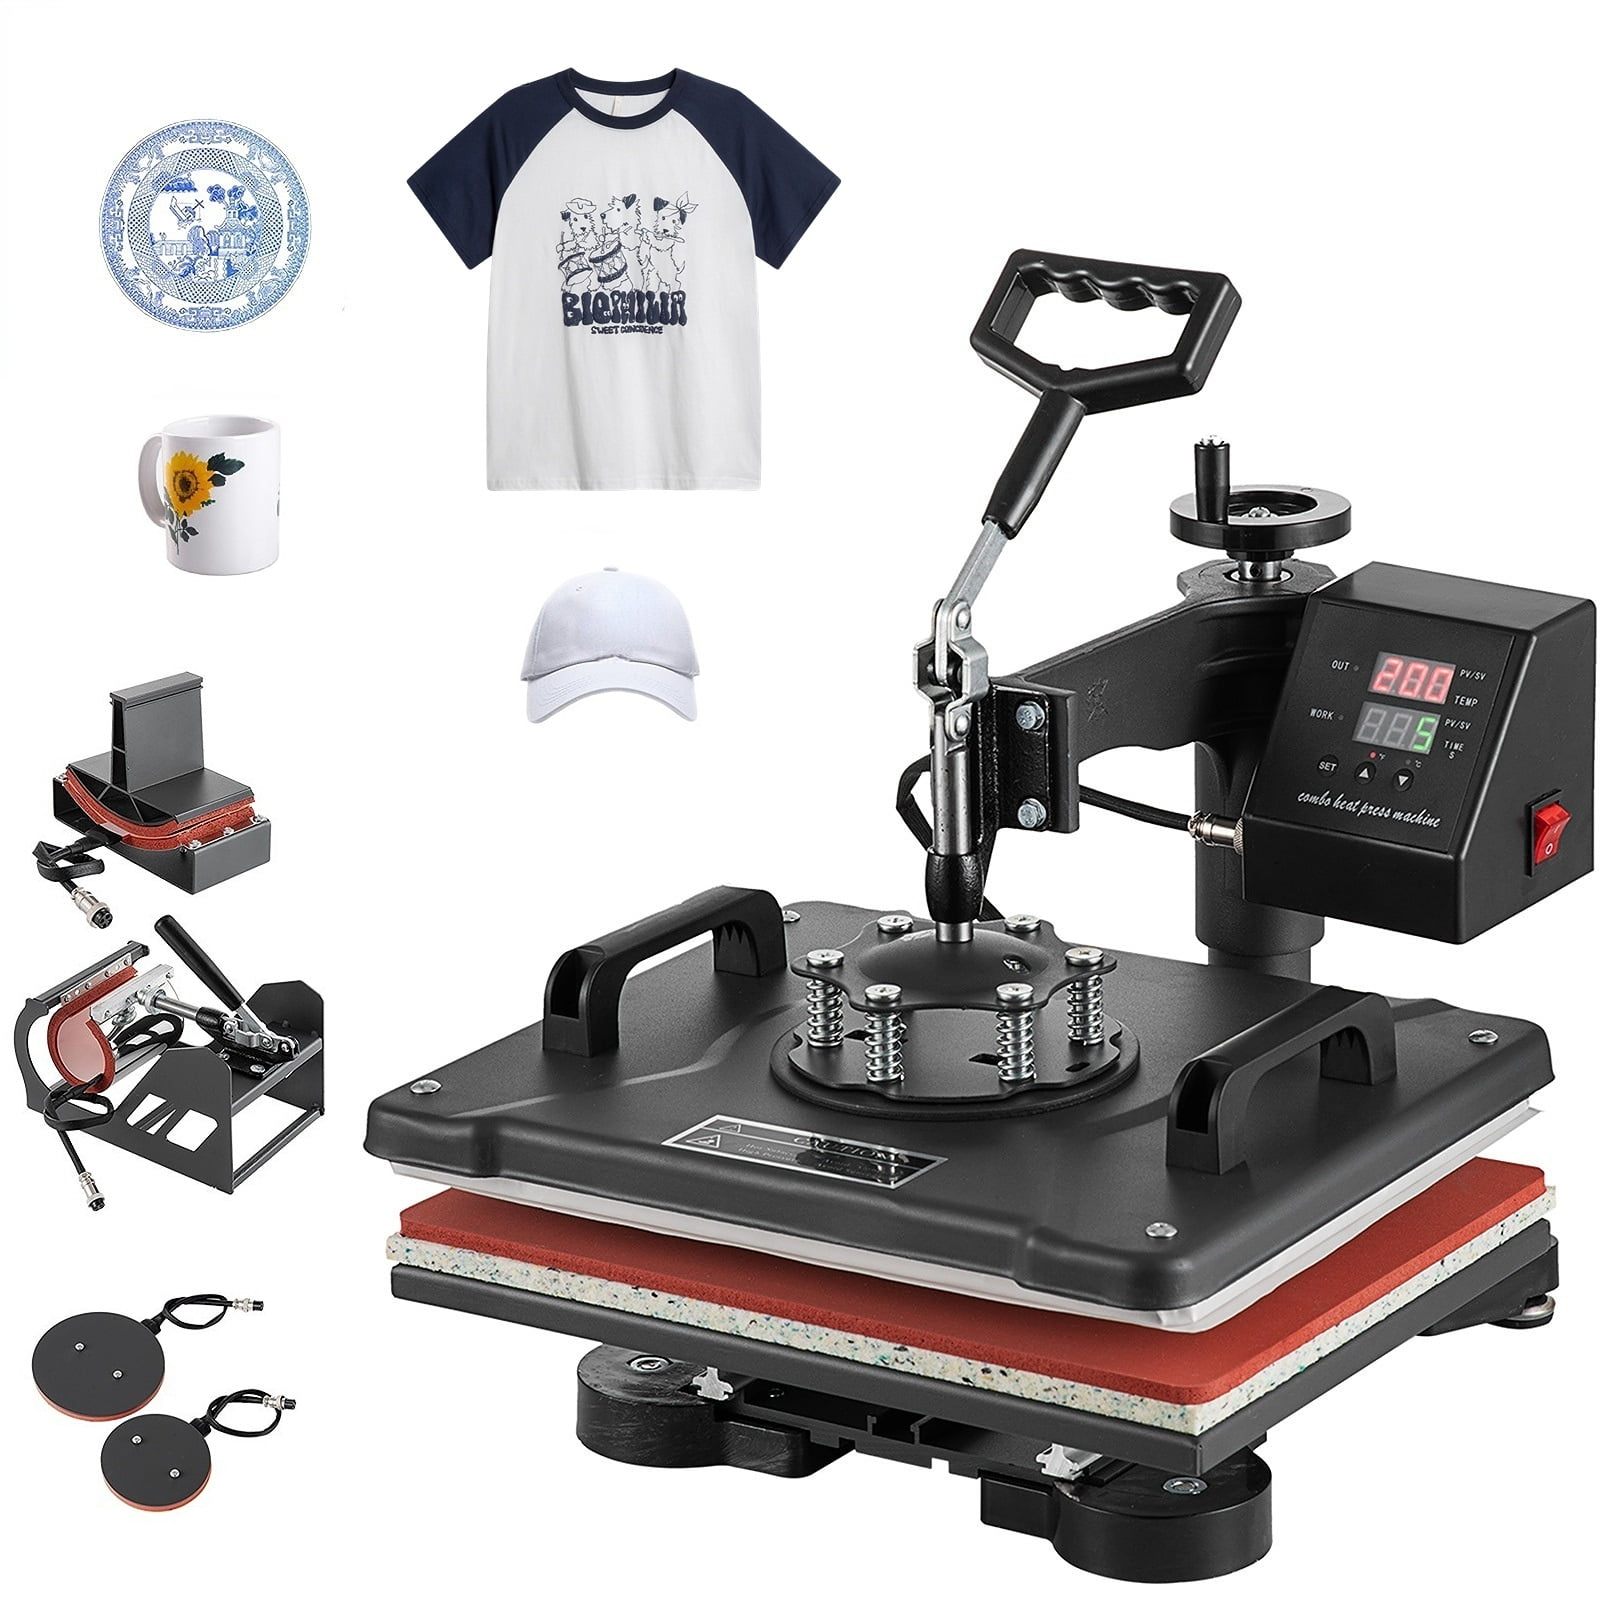 SHZOND 8 in 1 Heat Press Machine 12x15 inch Multifunctional Transfer Sublimation  Heat Press for T-shirts Hat Mug Plate 